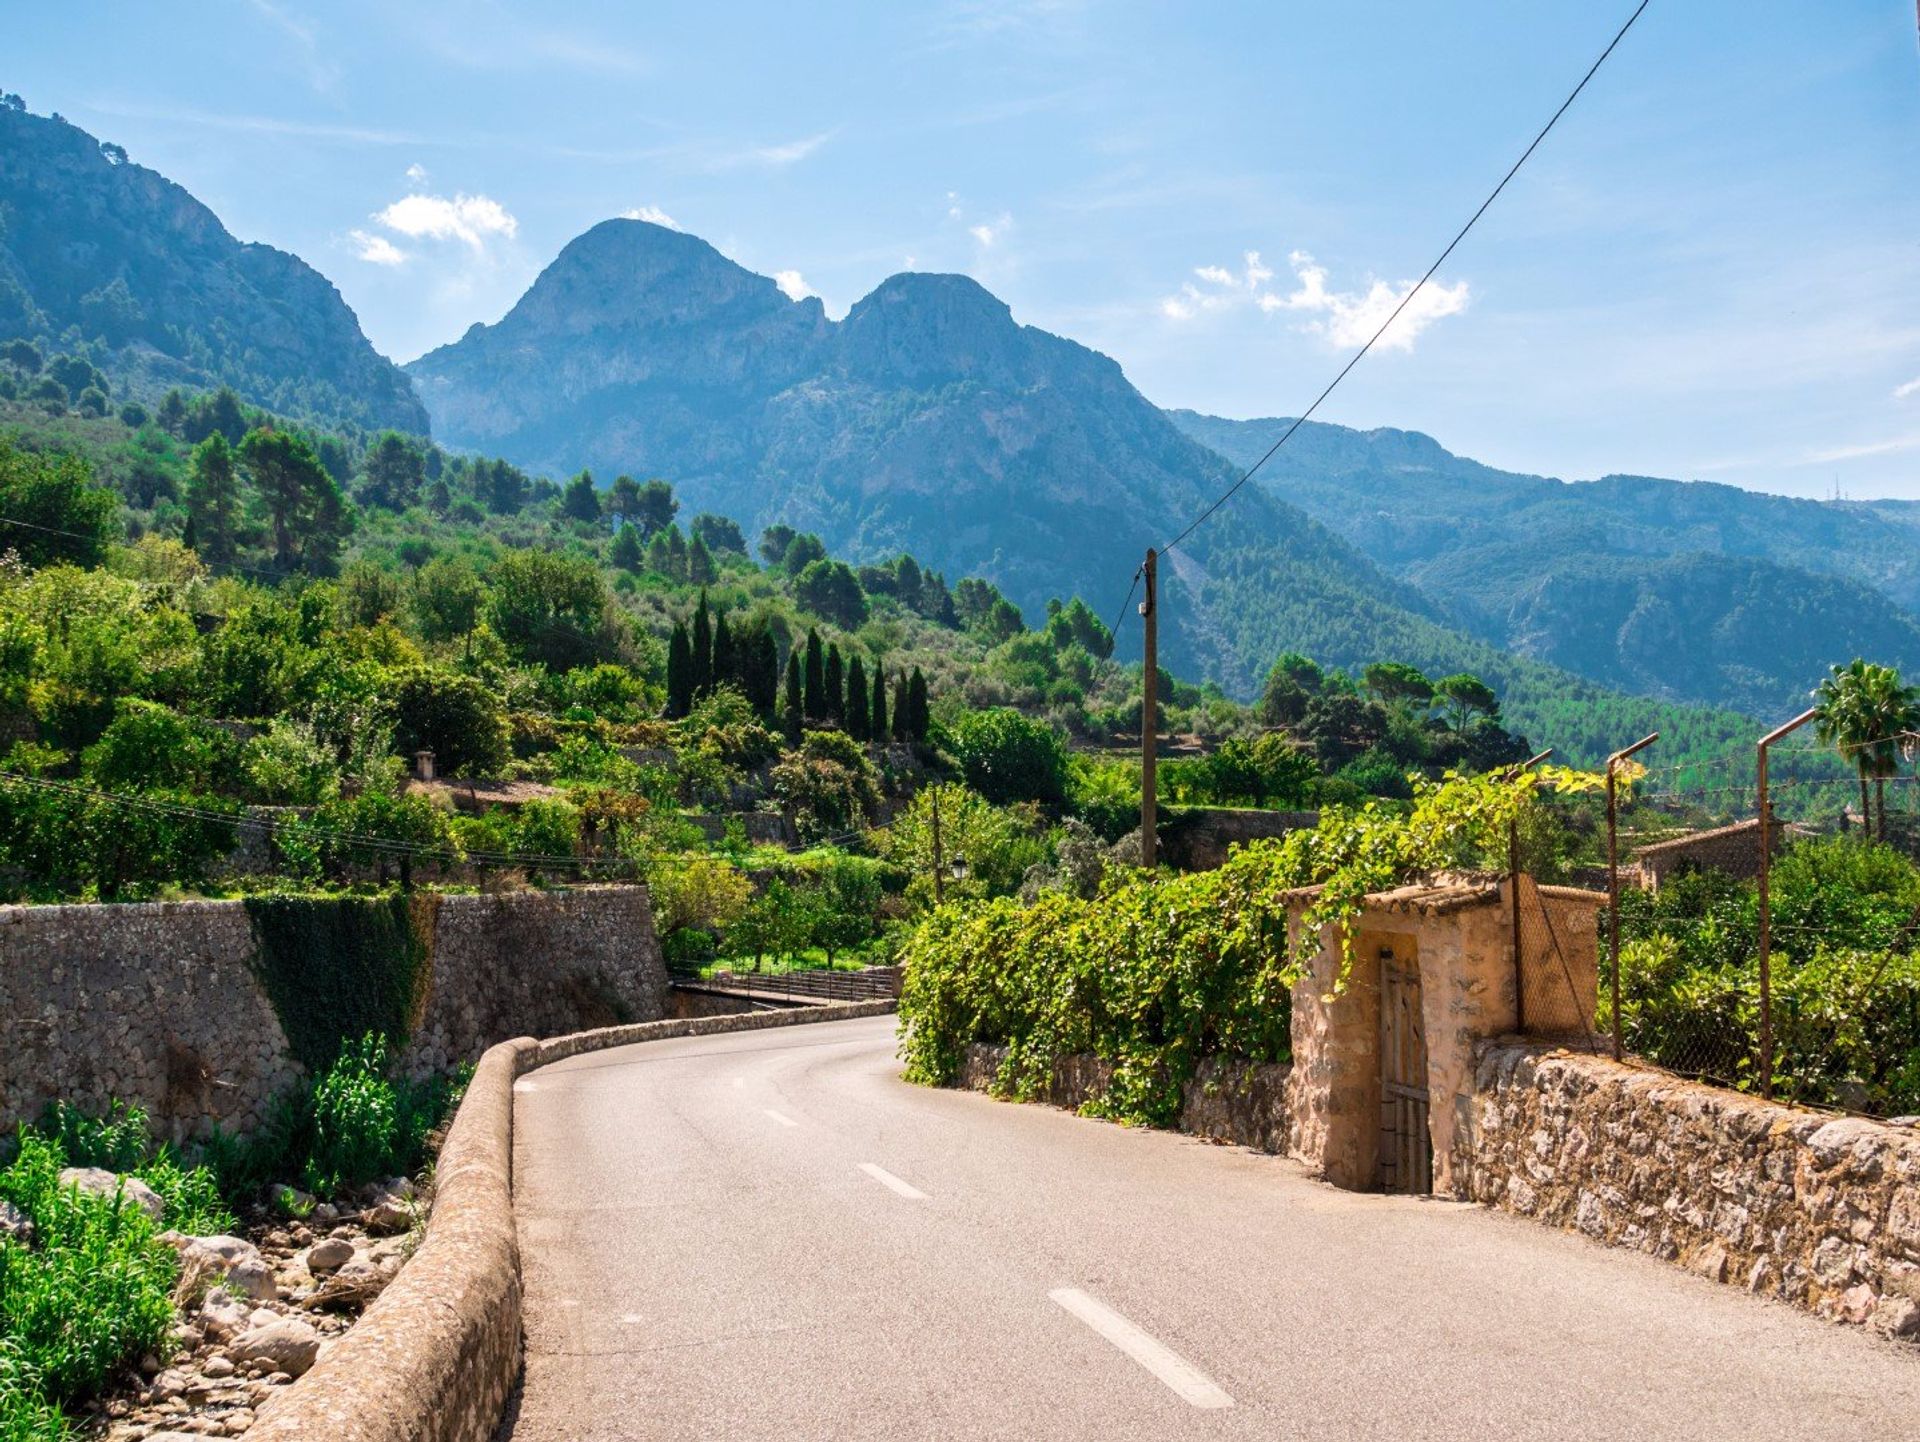 The narrow winding roads around Sóller and Port de Sóller - perfect for cycling